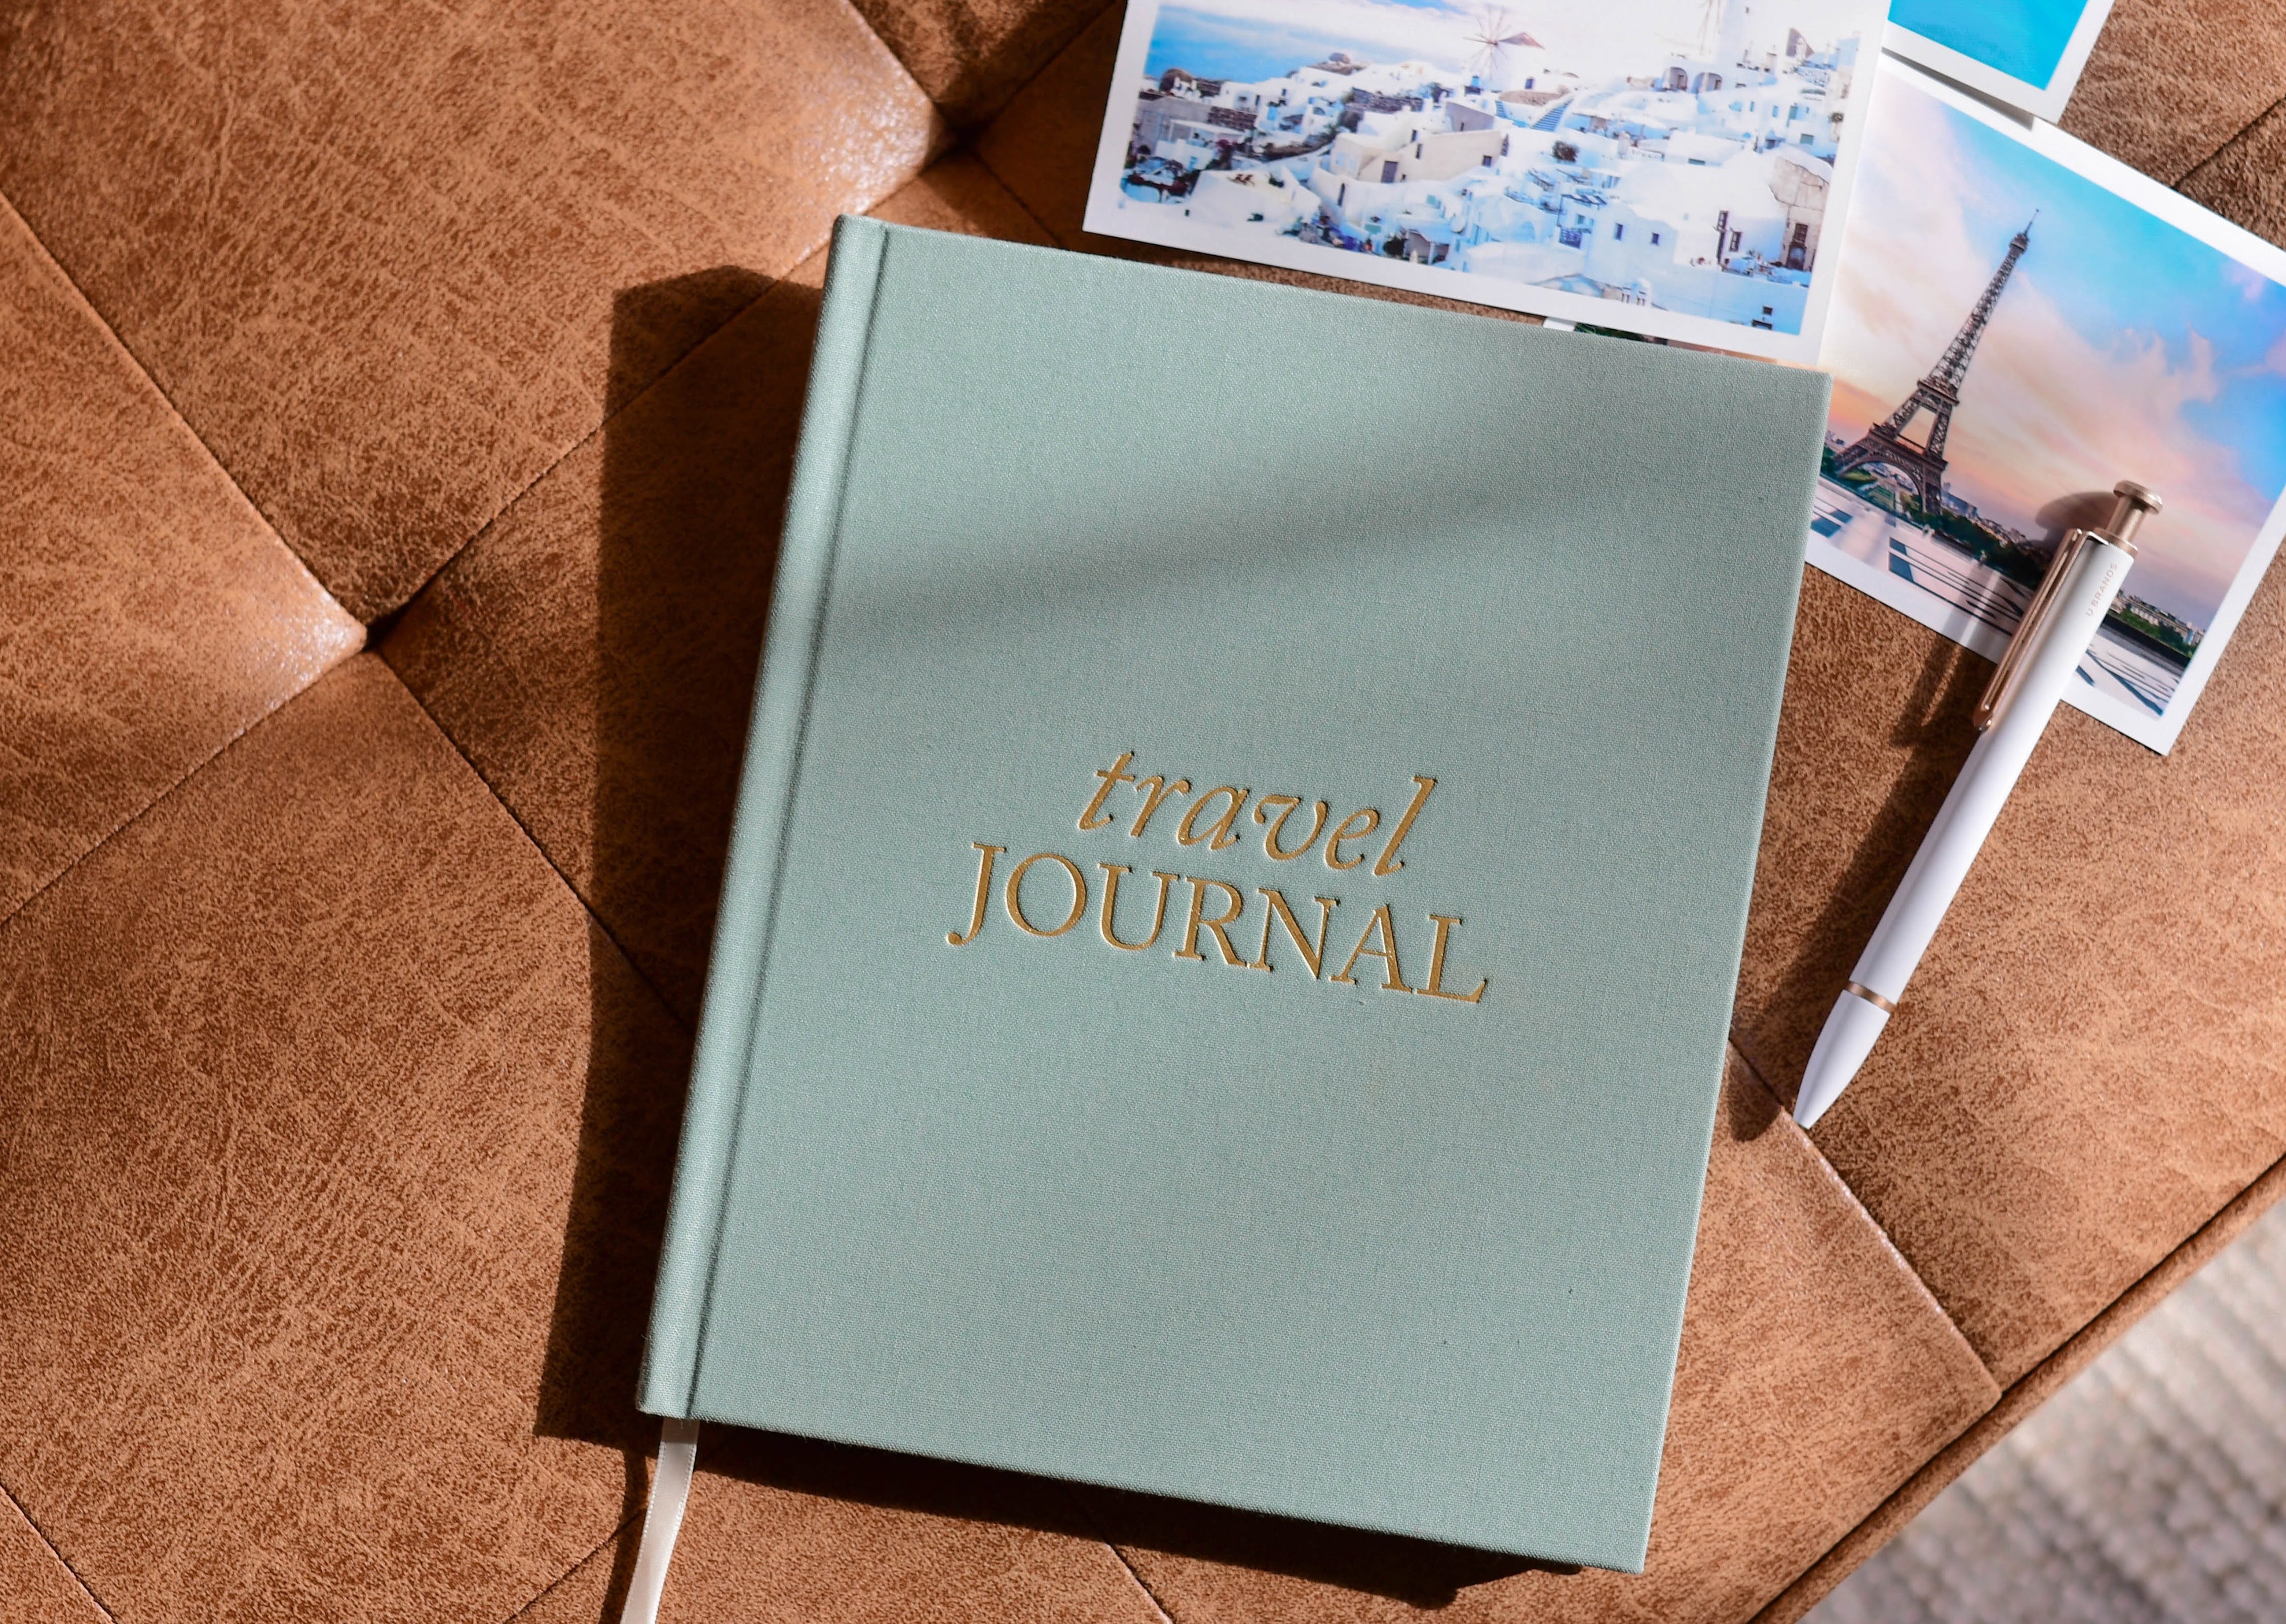 Over the Hills, Travel Journal